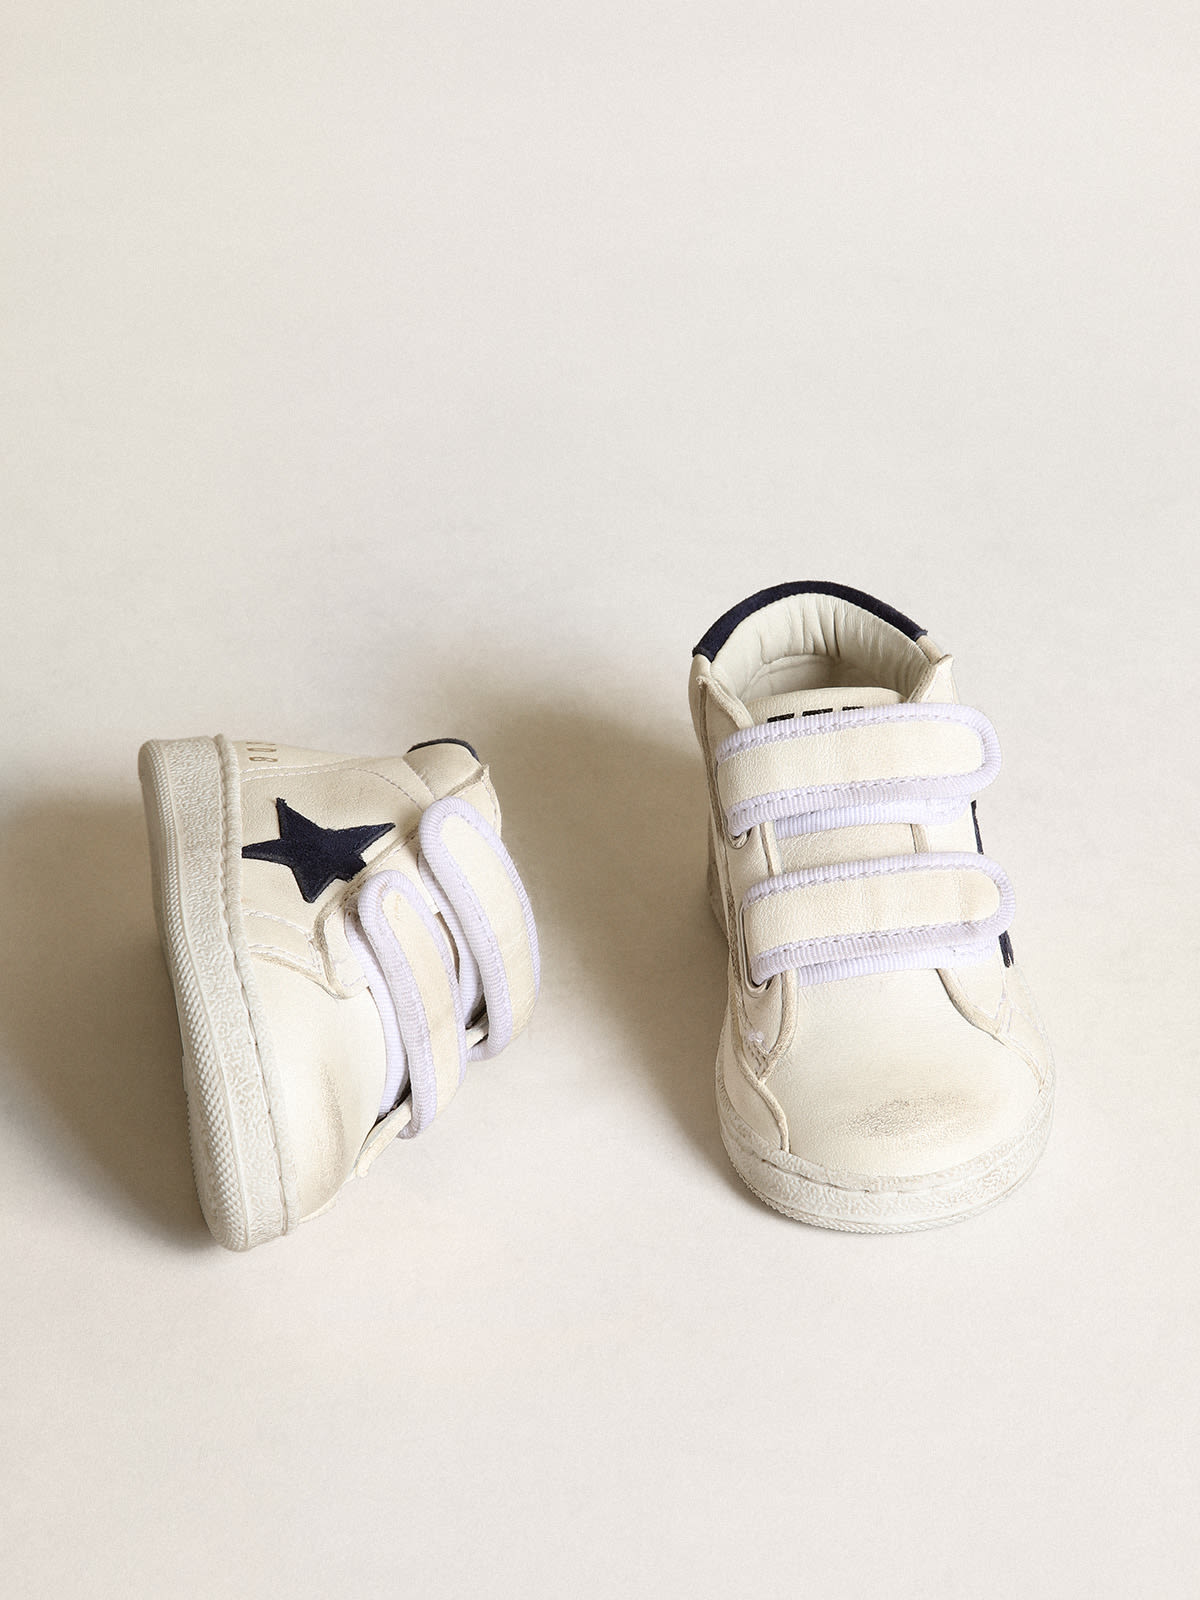 Golden Goose - June in nappa leather with dark blue suede star and heel tab in 